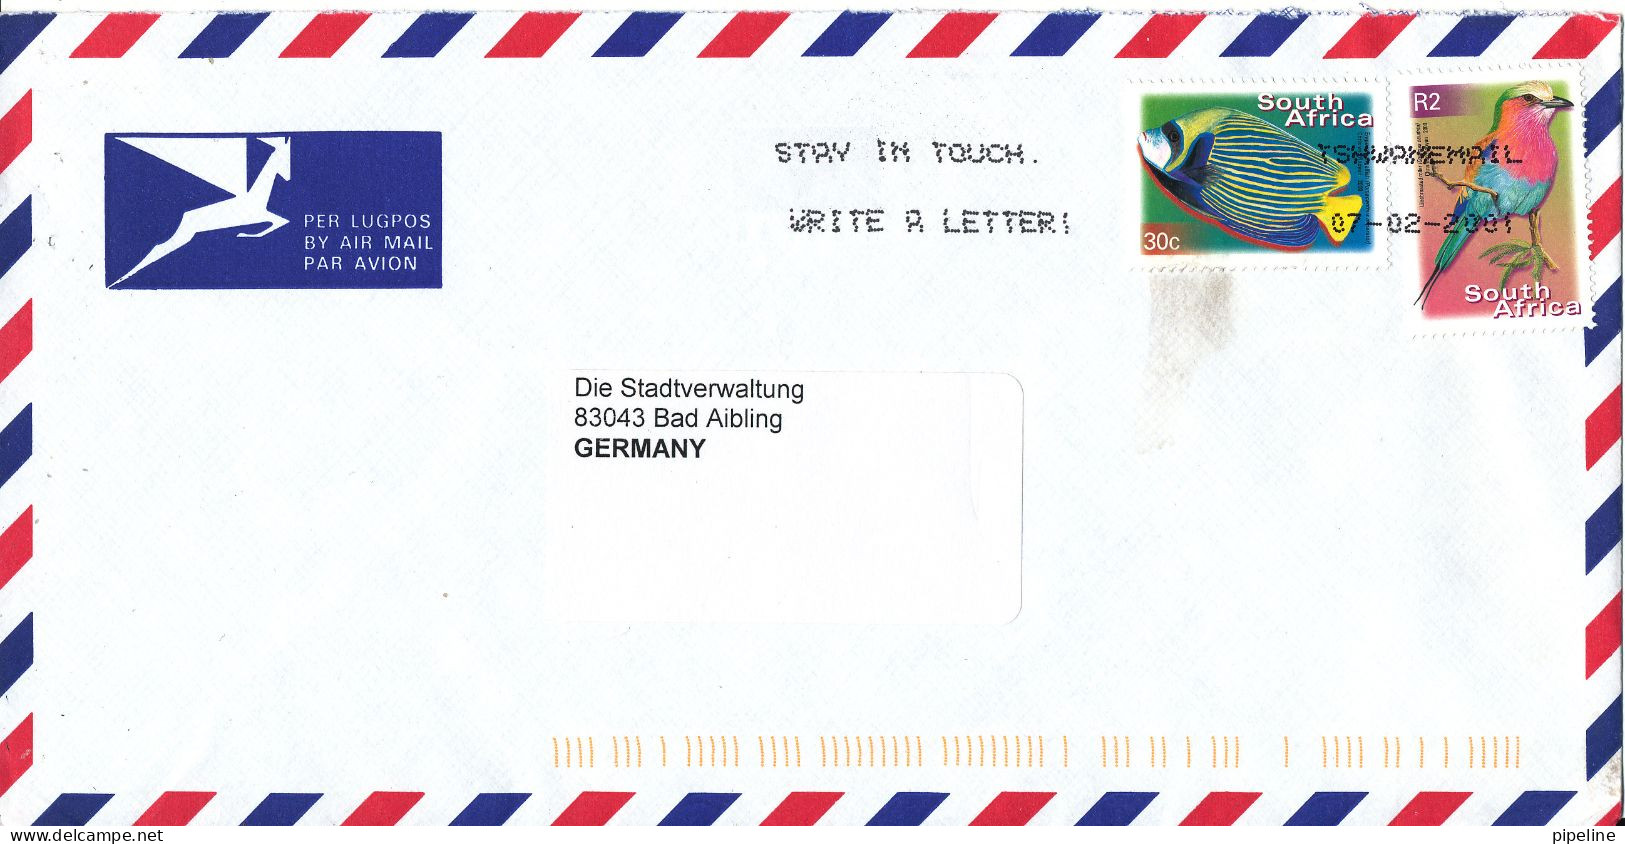 South Africa Air Mail Cover Sent To Germany 7-2-2001 Topic Stamps BIRD And FISH - Luftpost